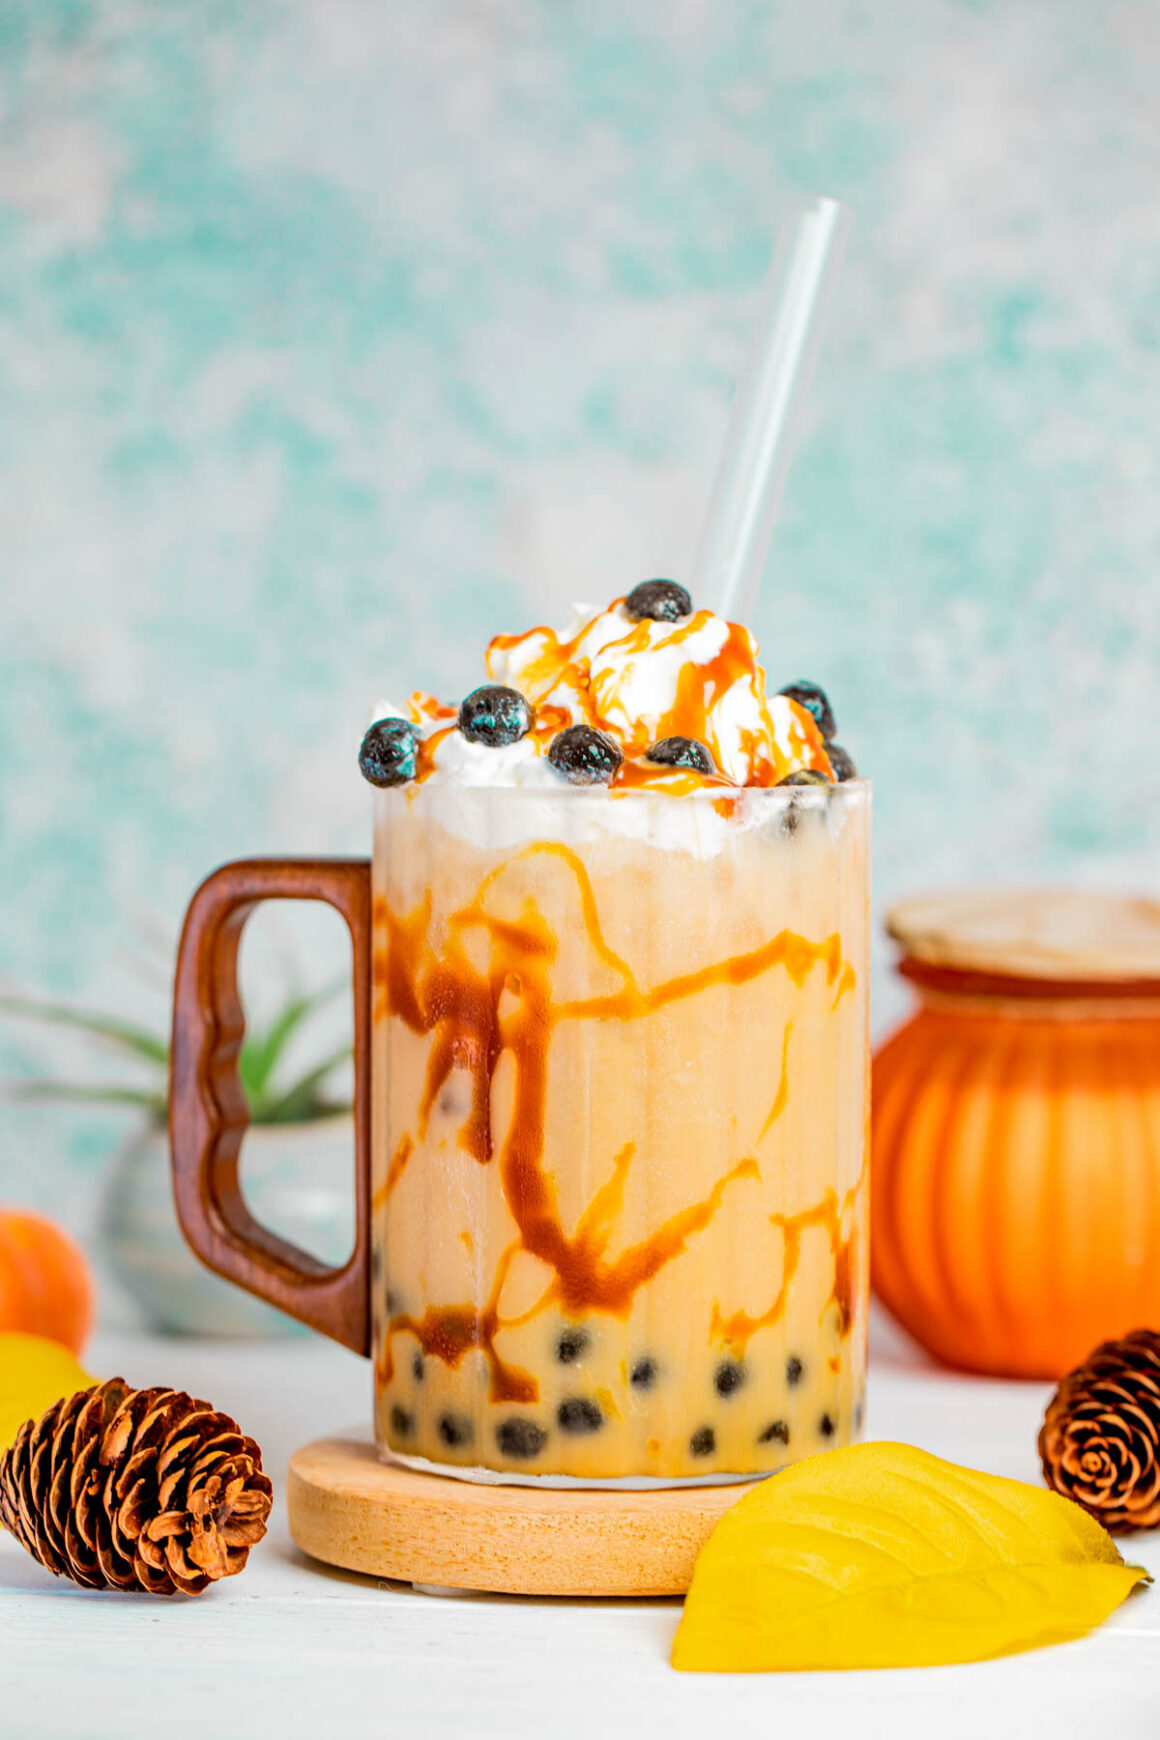 With every sip of Pumpkin Pie Bubble Tea, you're transported to a crisp fall day, where the warmth of pumpkin pie fills the air.